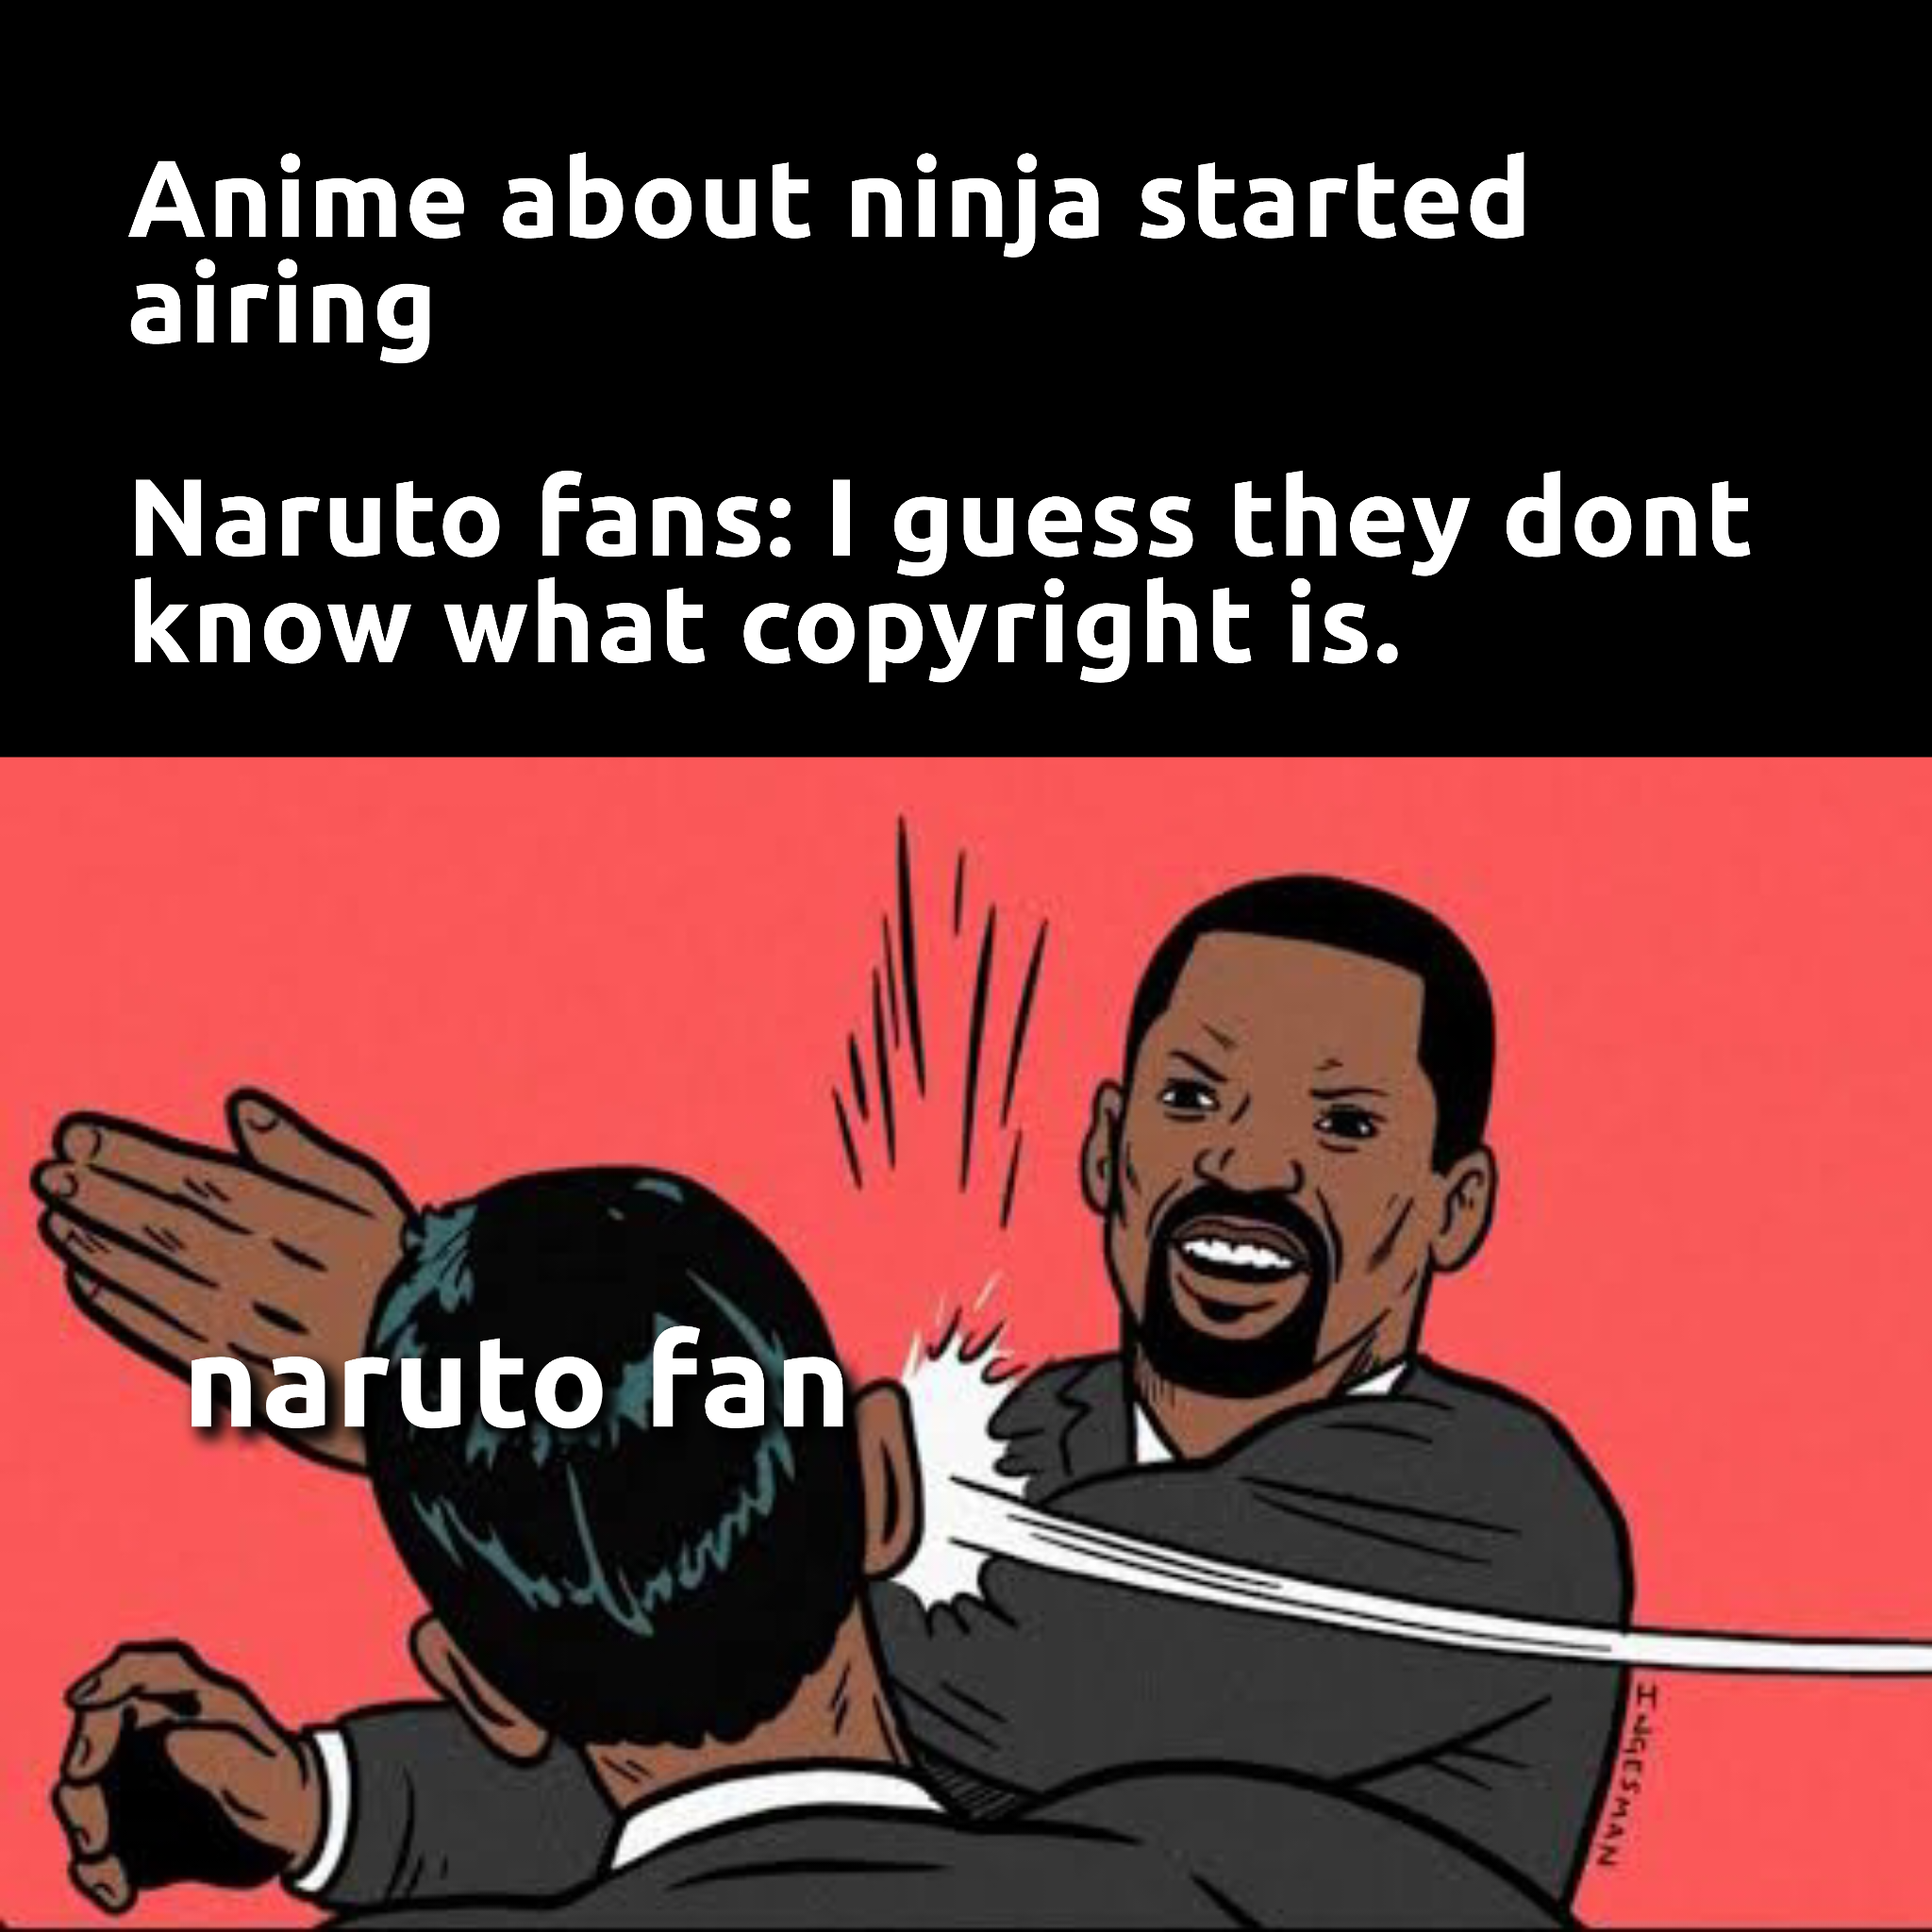 It is not a naruto copy.